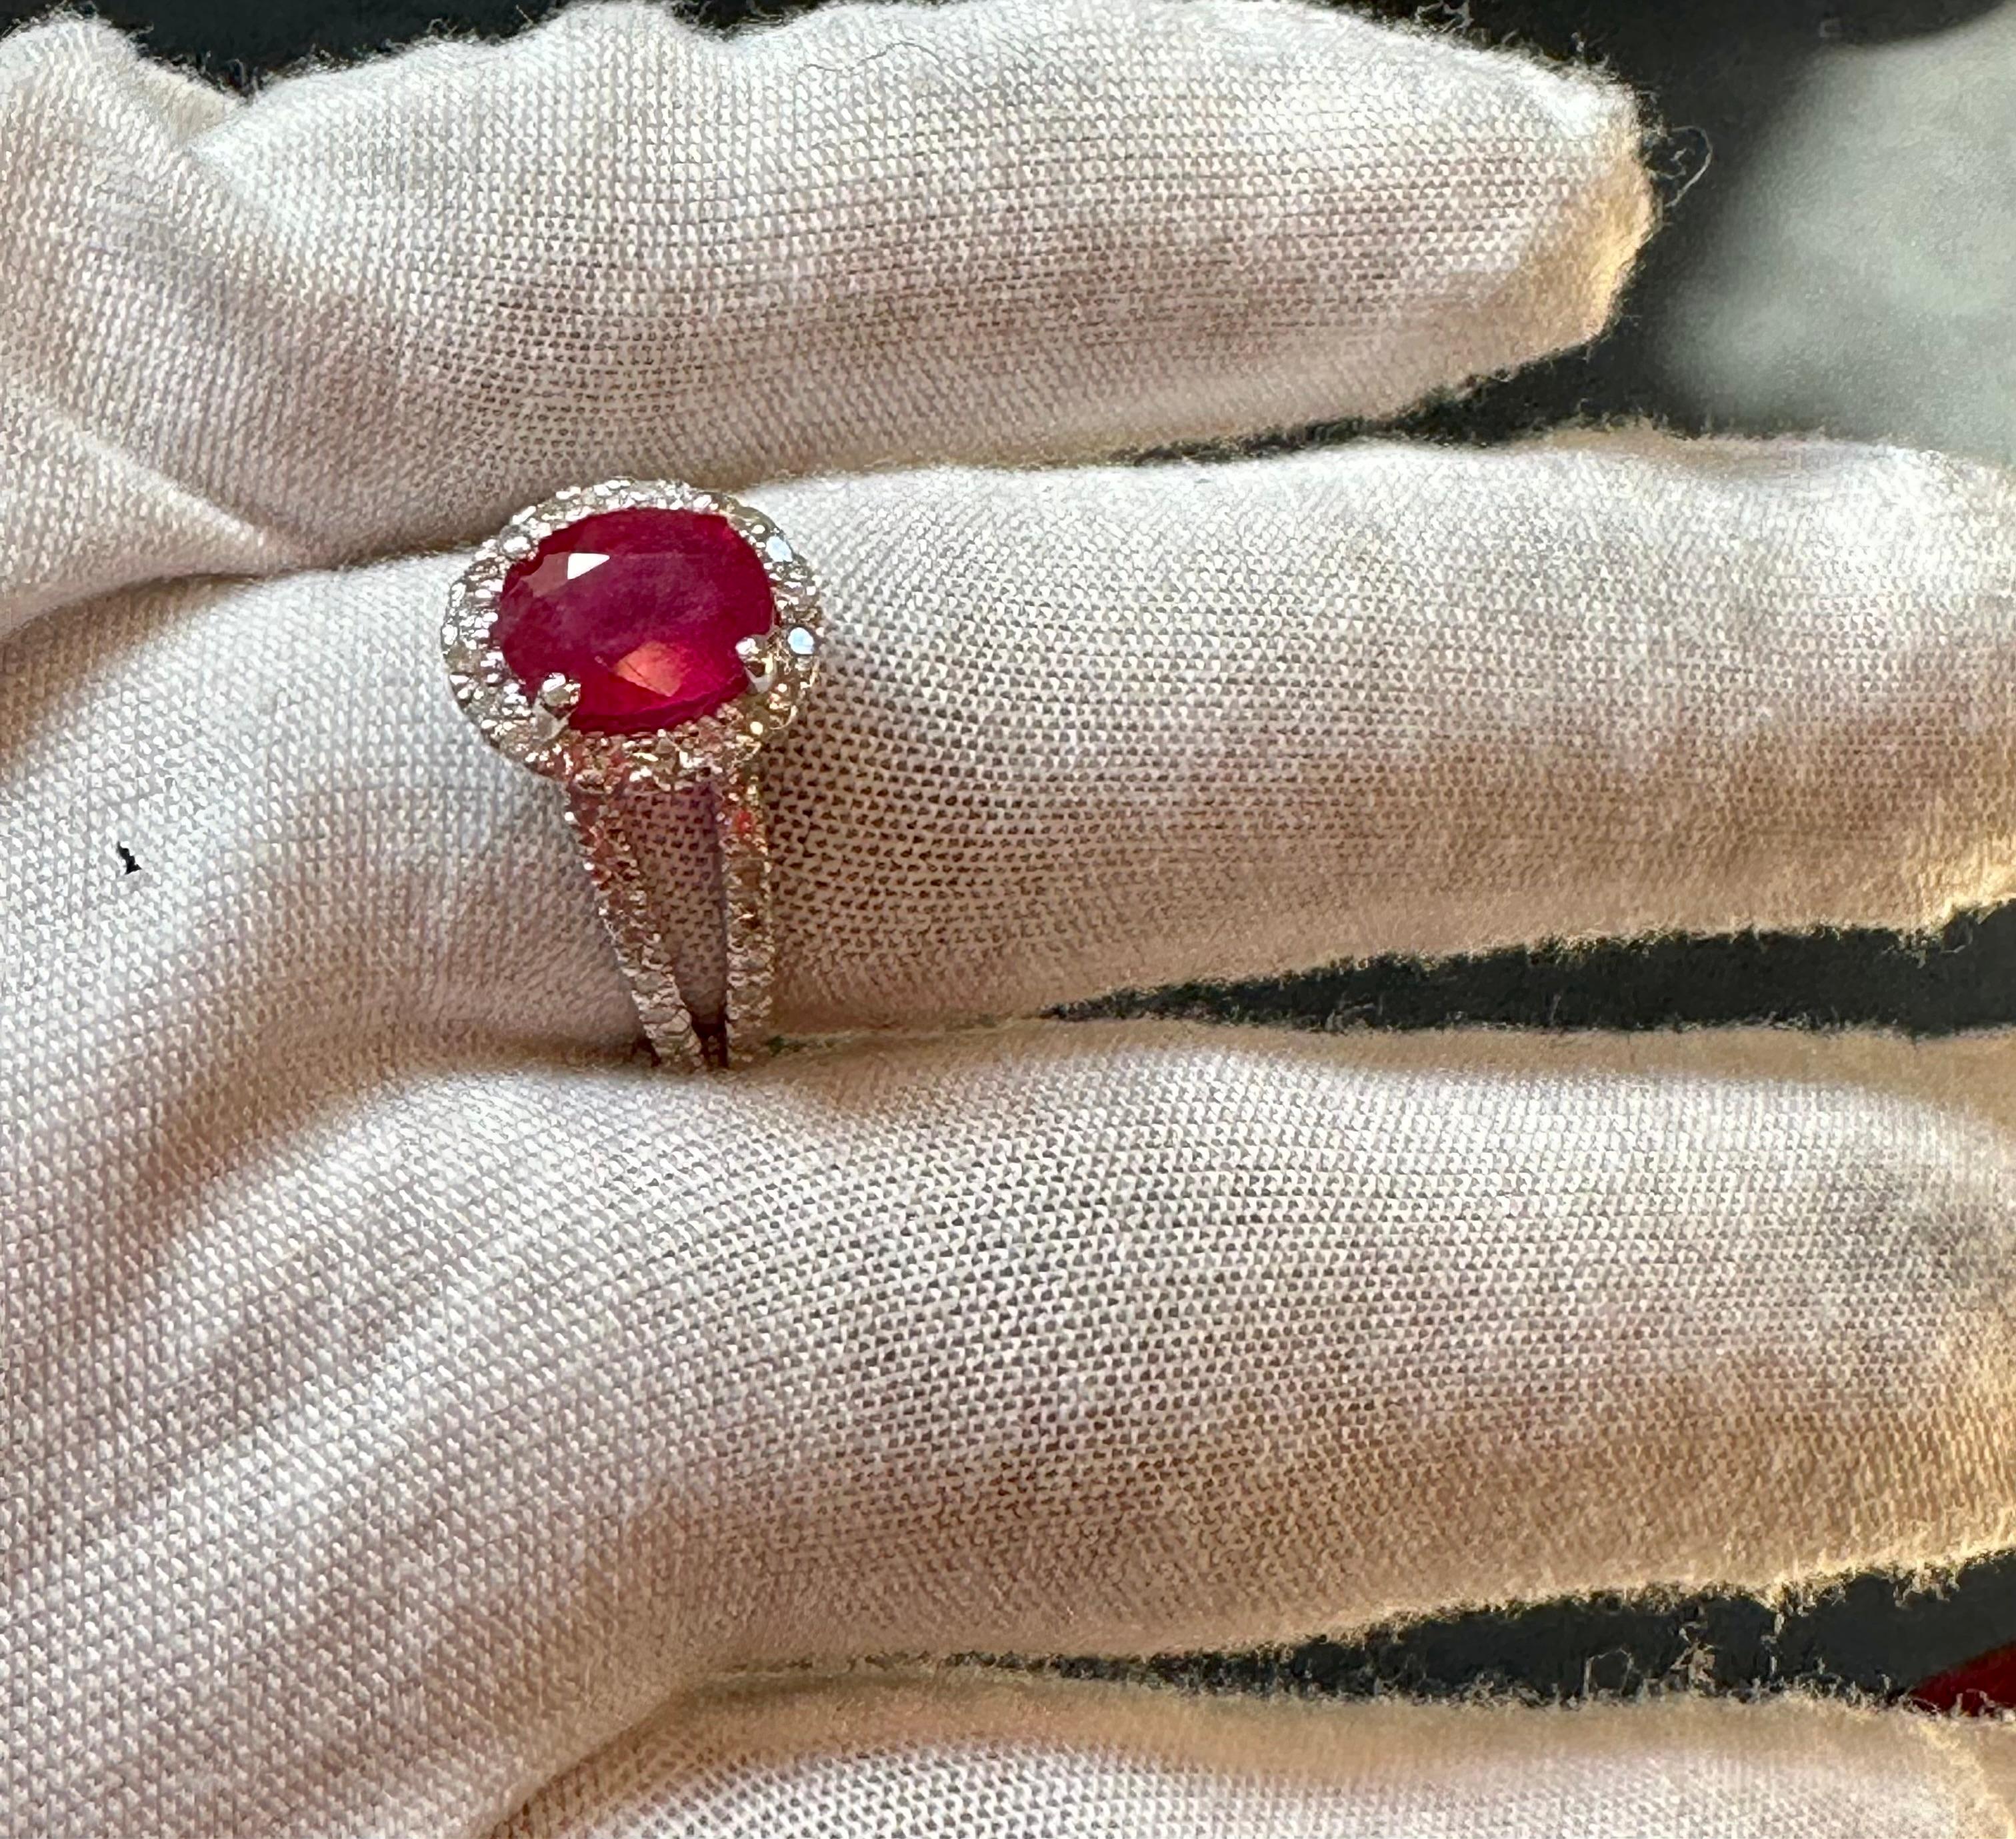 Oval Cut 2.5 Carat Oval Treated Ruby & 2 ct Diamond Ring 14 Karat White Gold Size 7 For Sale